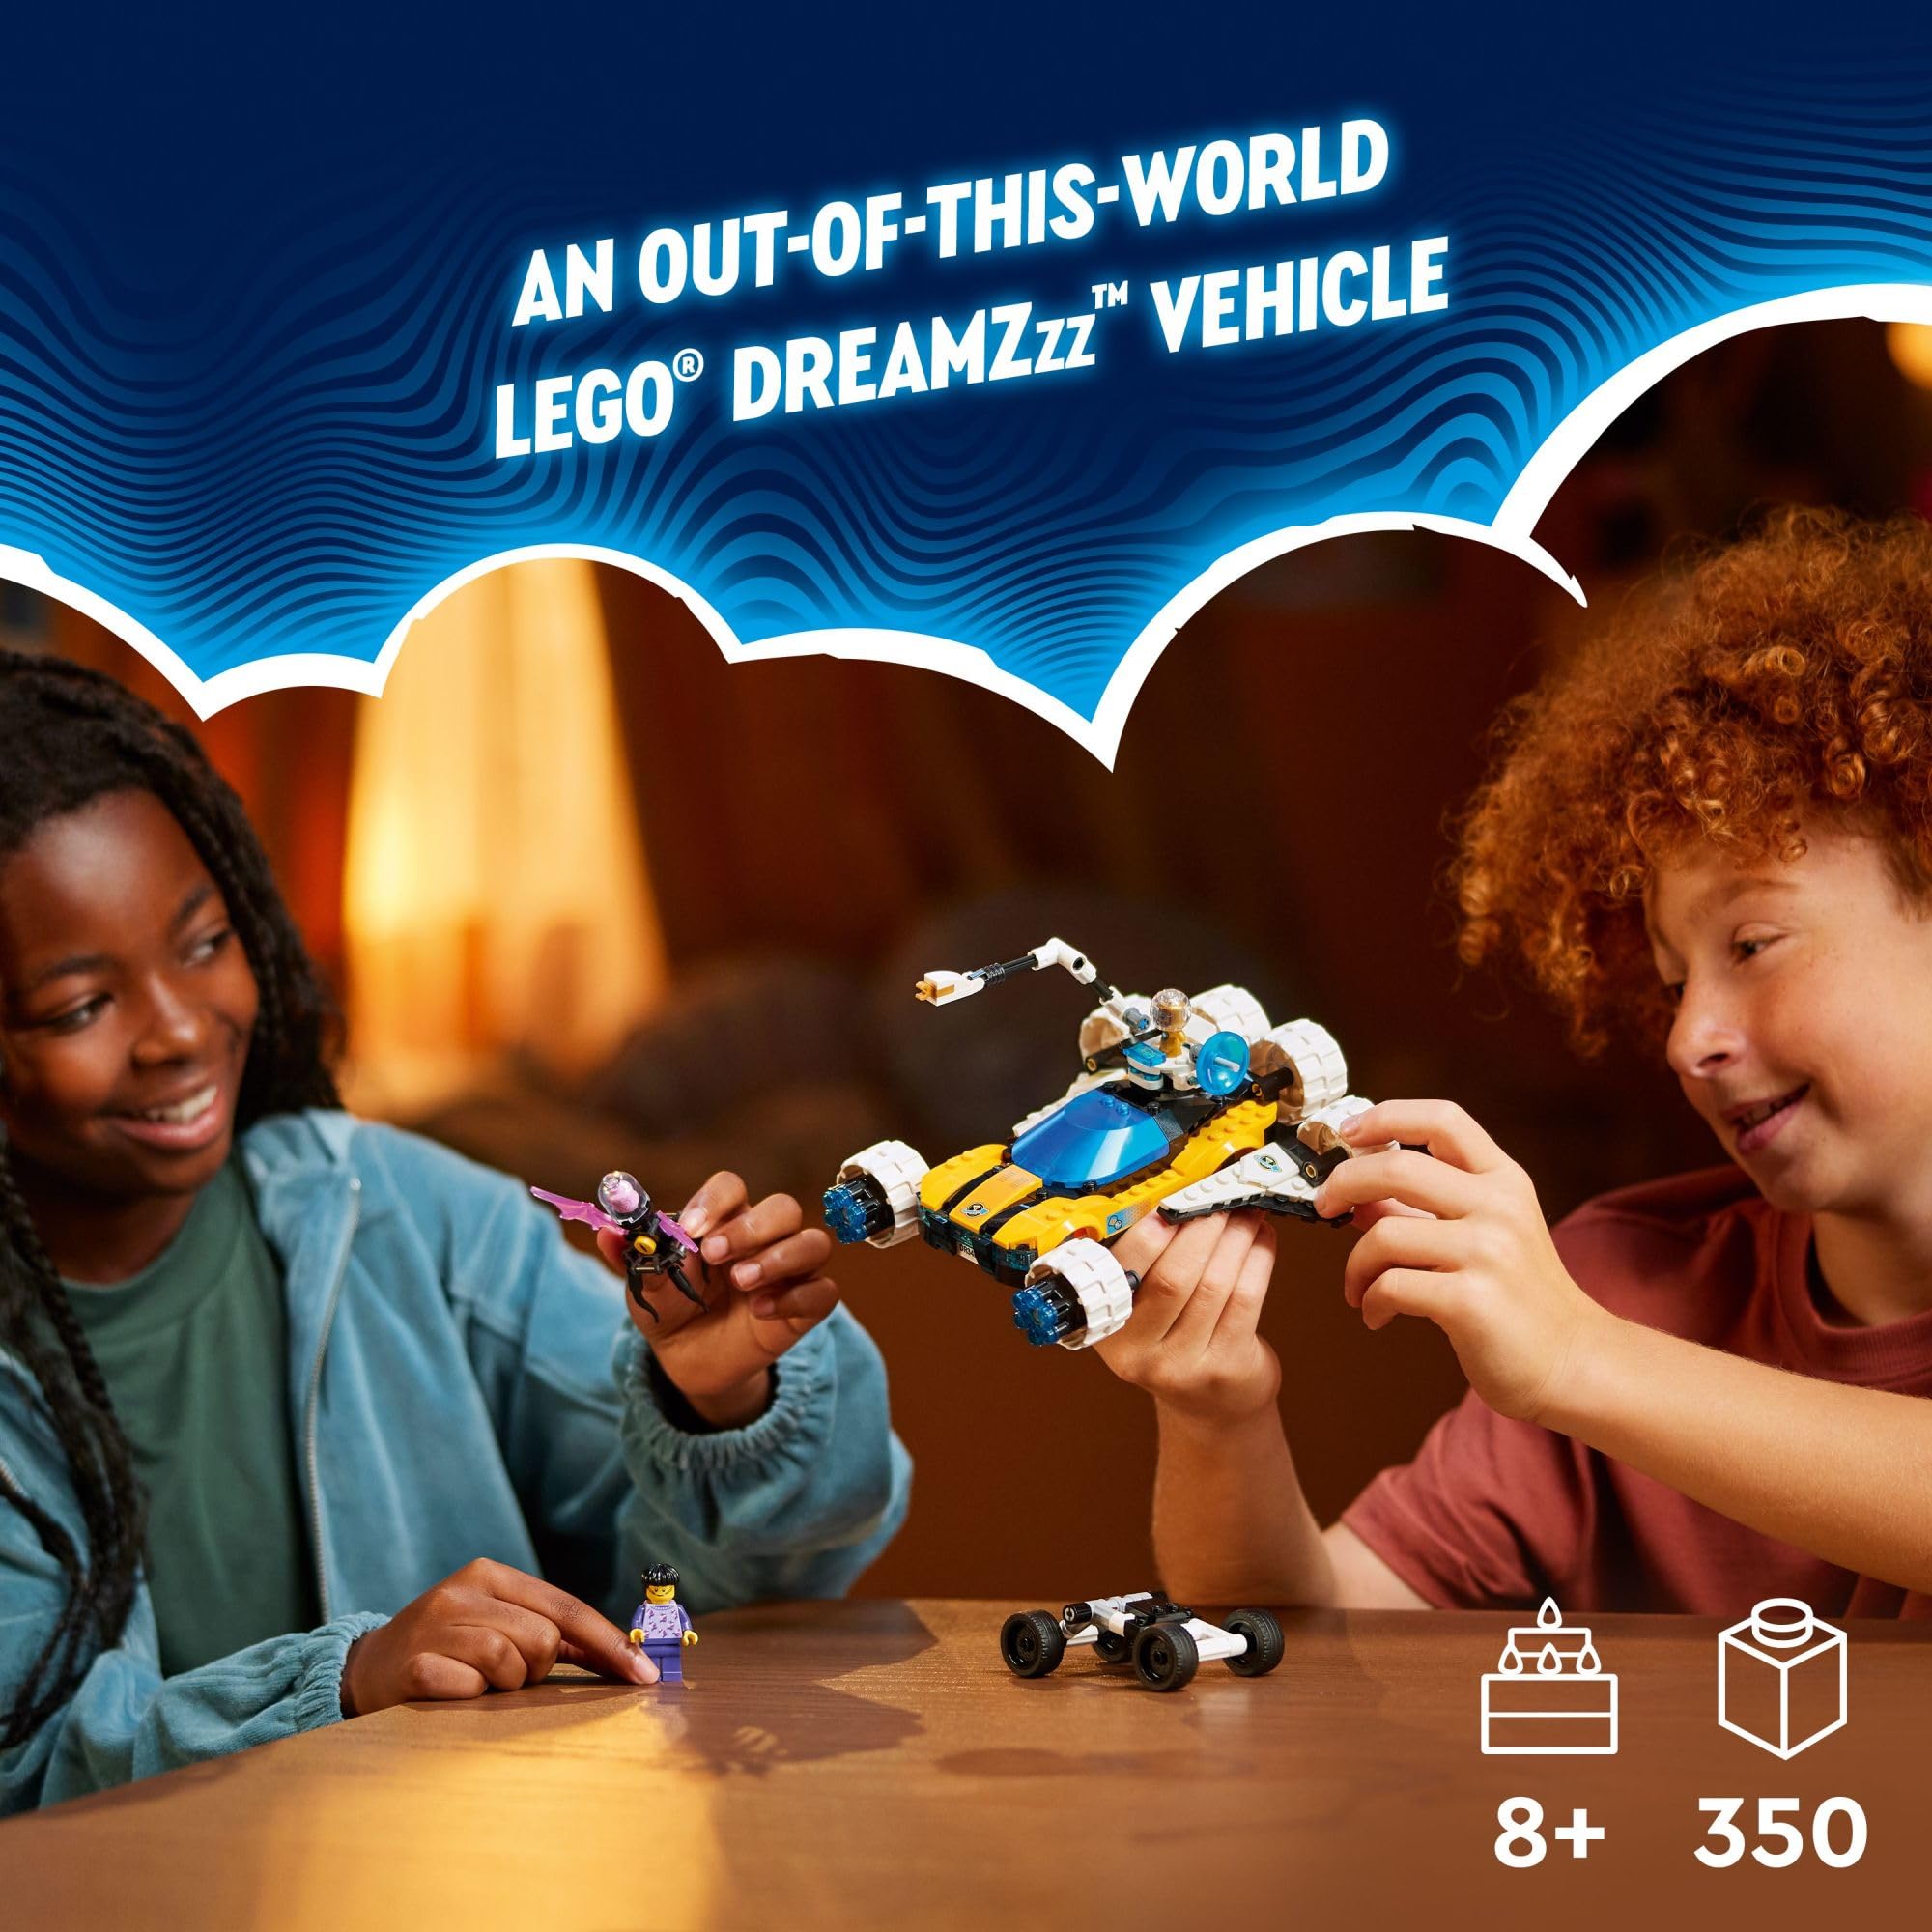 LEGO DREAMZzz Mr. Oz’s Space Car Toy, Transforming Vehicle Building Set, Includes TV Show Minifigures Mr. Oz, Albert and Jayden, Space Shuttle Toy Gift for Boys and Girls Aged 8 and Up, 71475